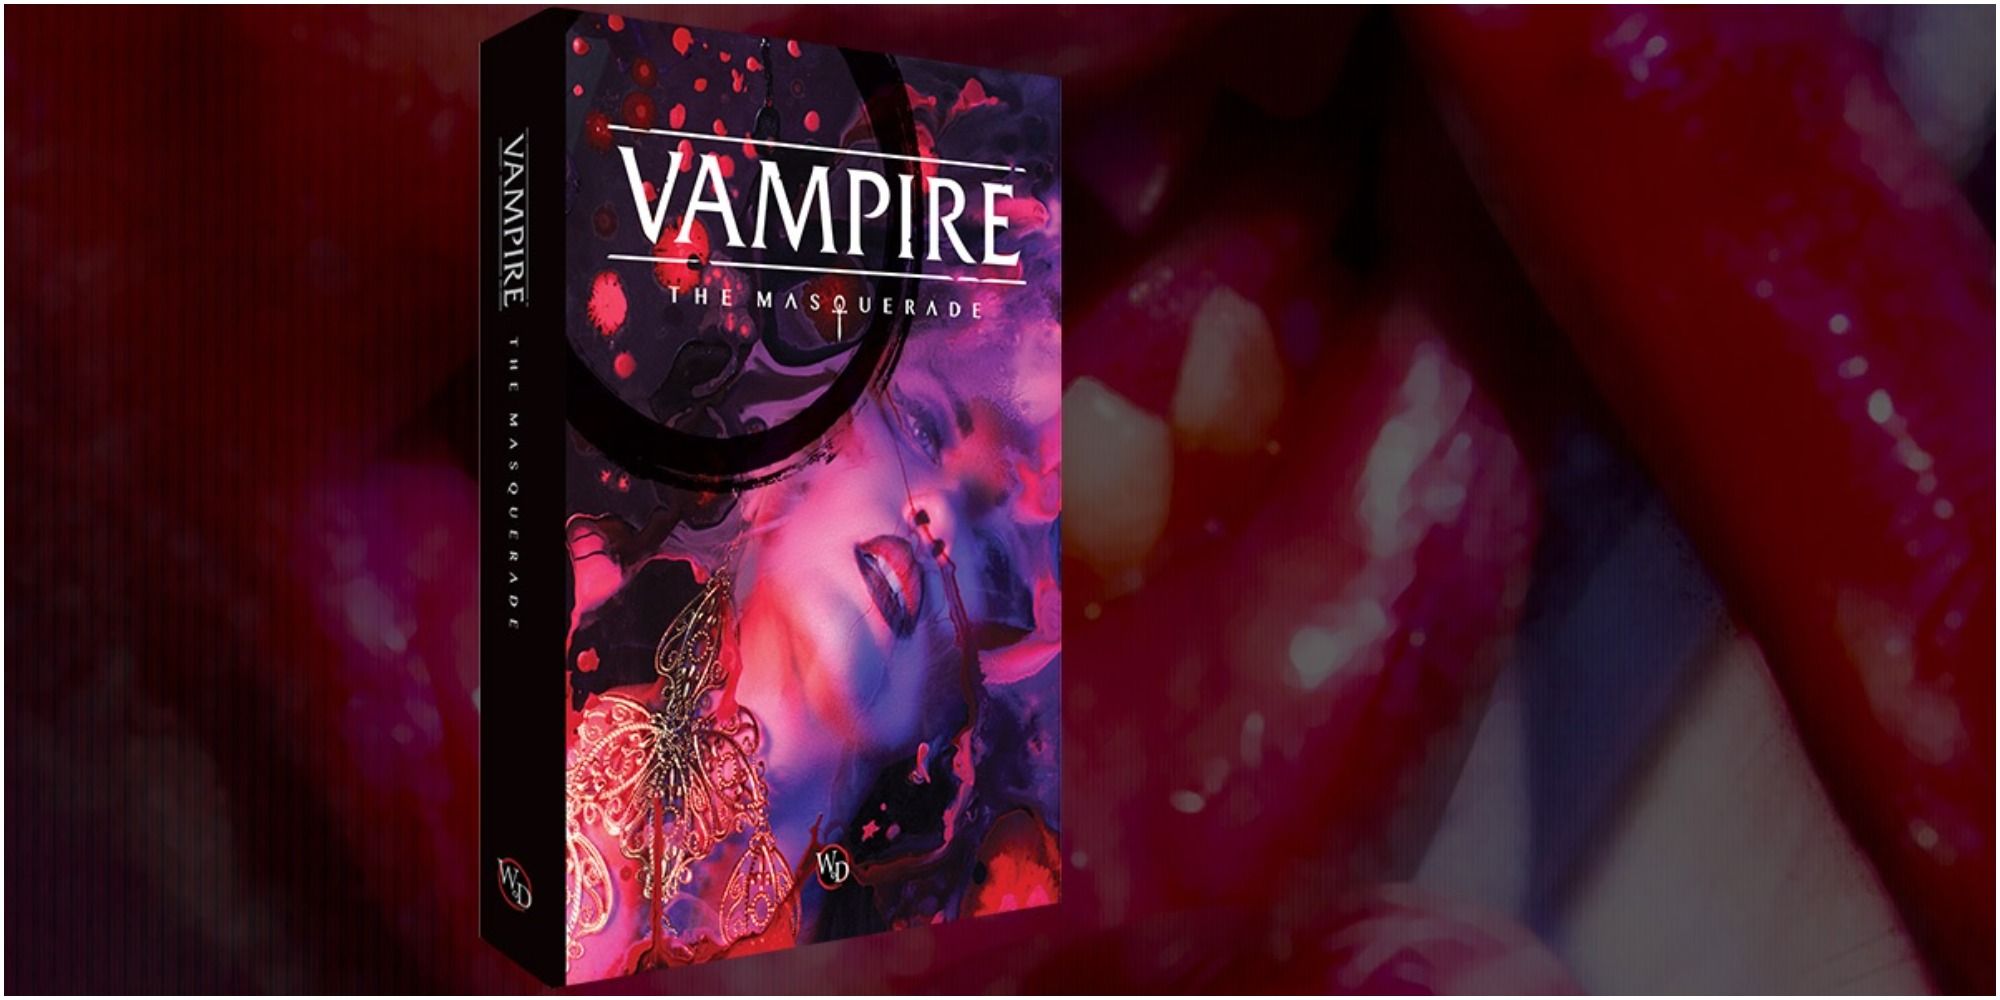 The Vampire: The Masquerade sourcebook, with a bloodied mouth in the background